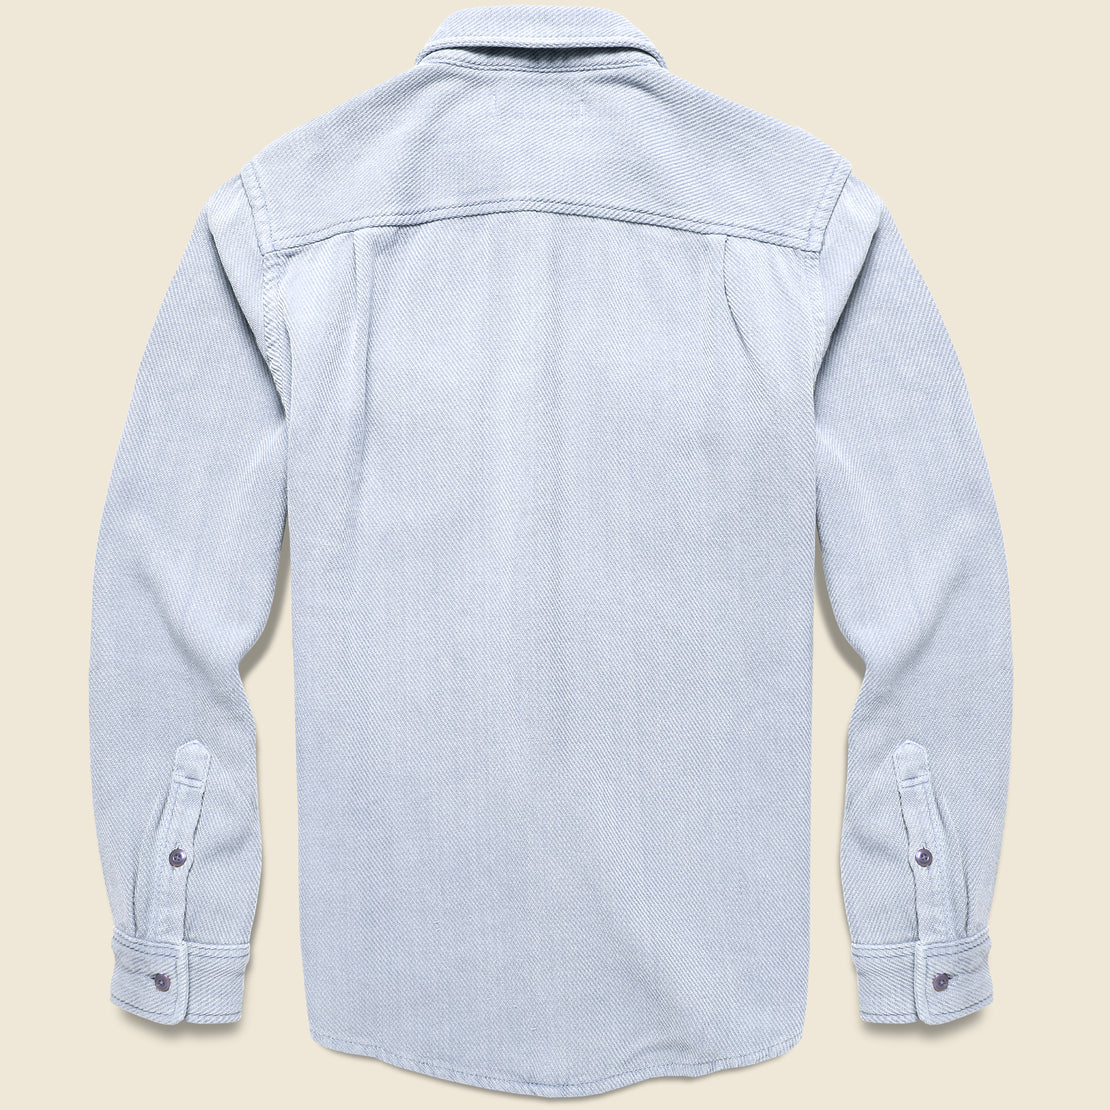 Chroma Blanket Shirt - Heather Blue - Outerknown - STAG Provisions - Tops - L/S Woven - Solid